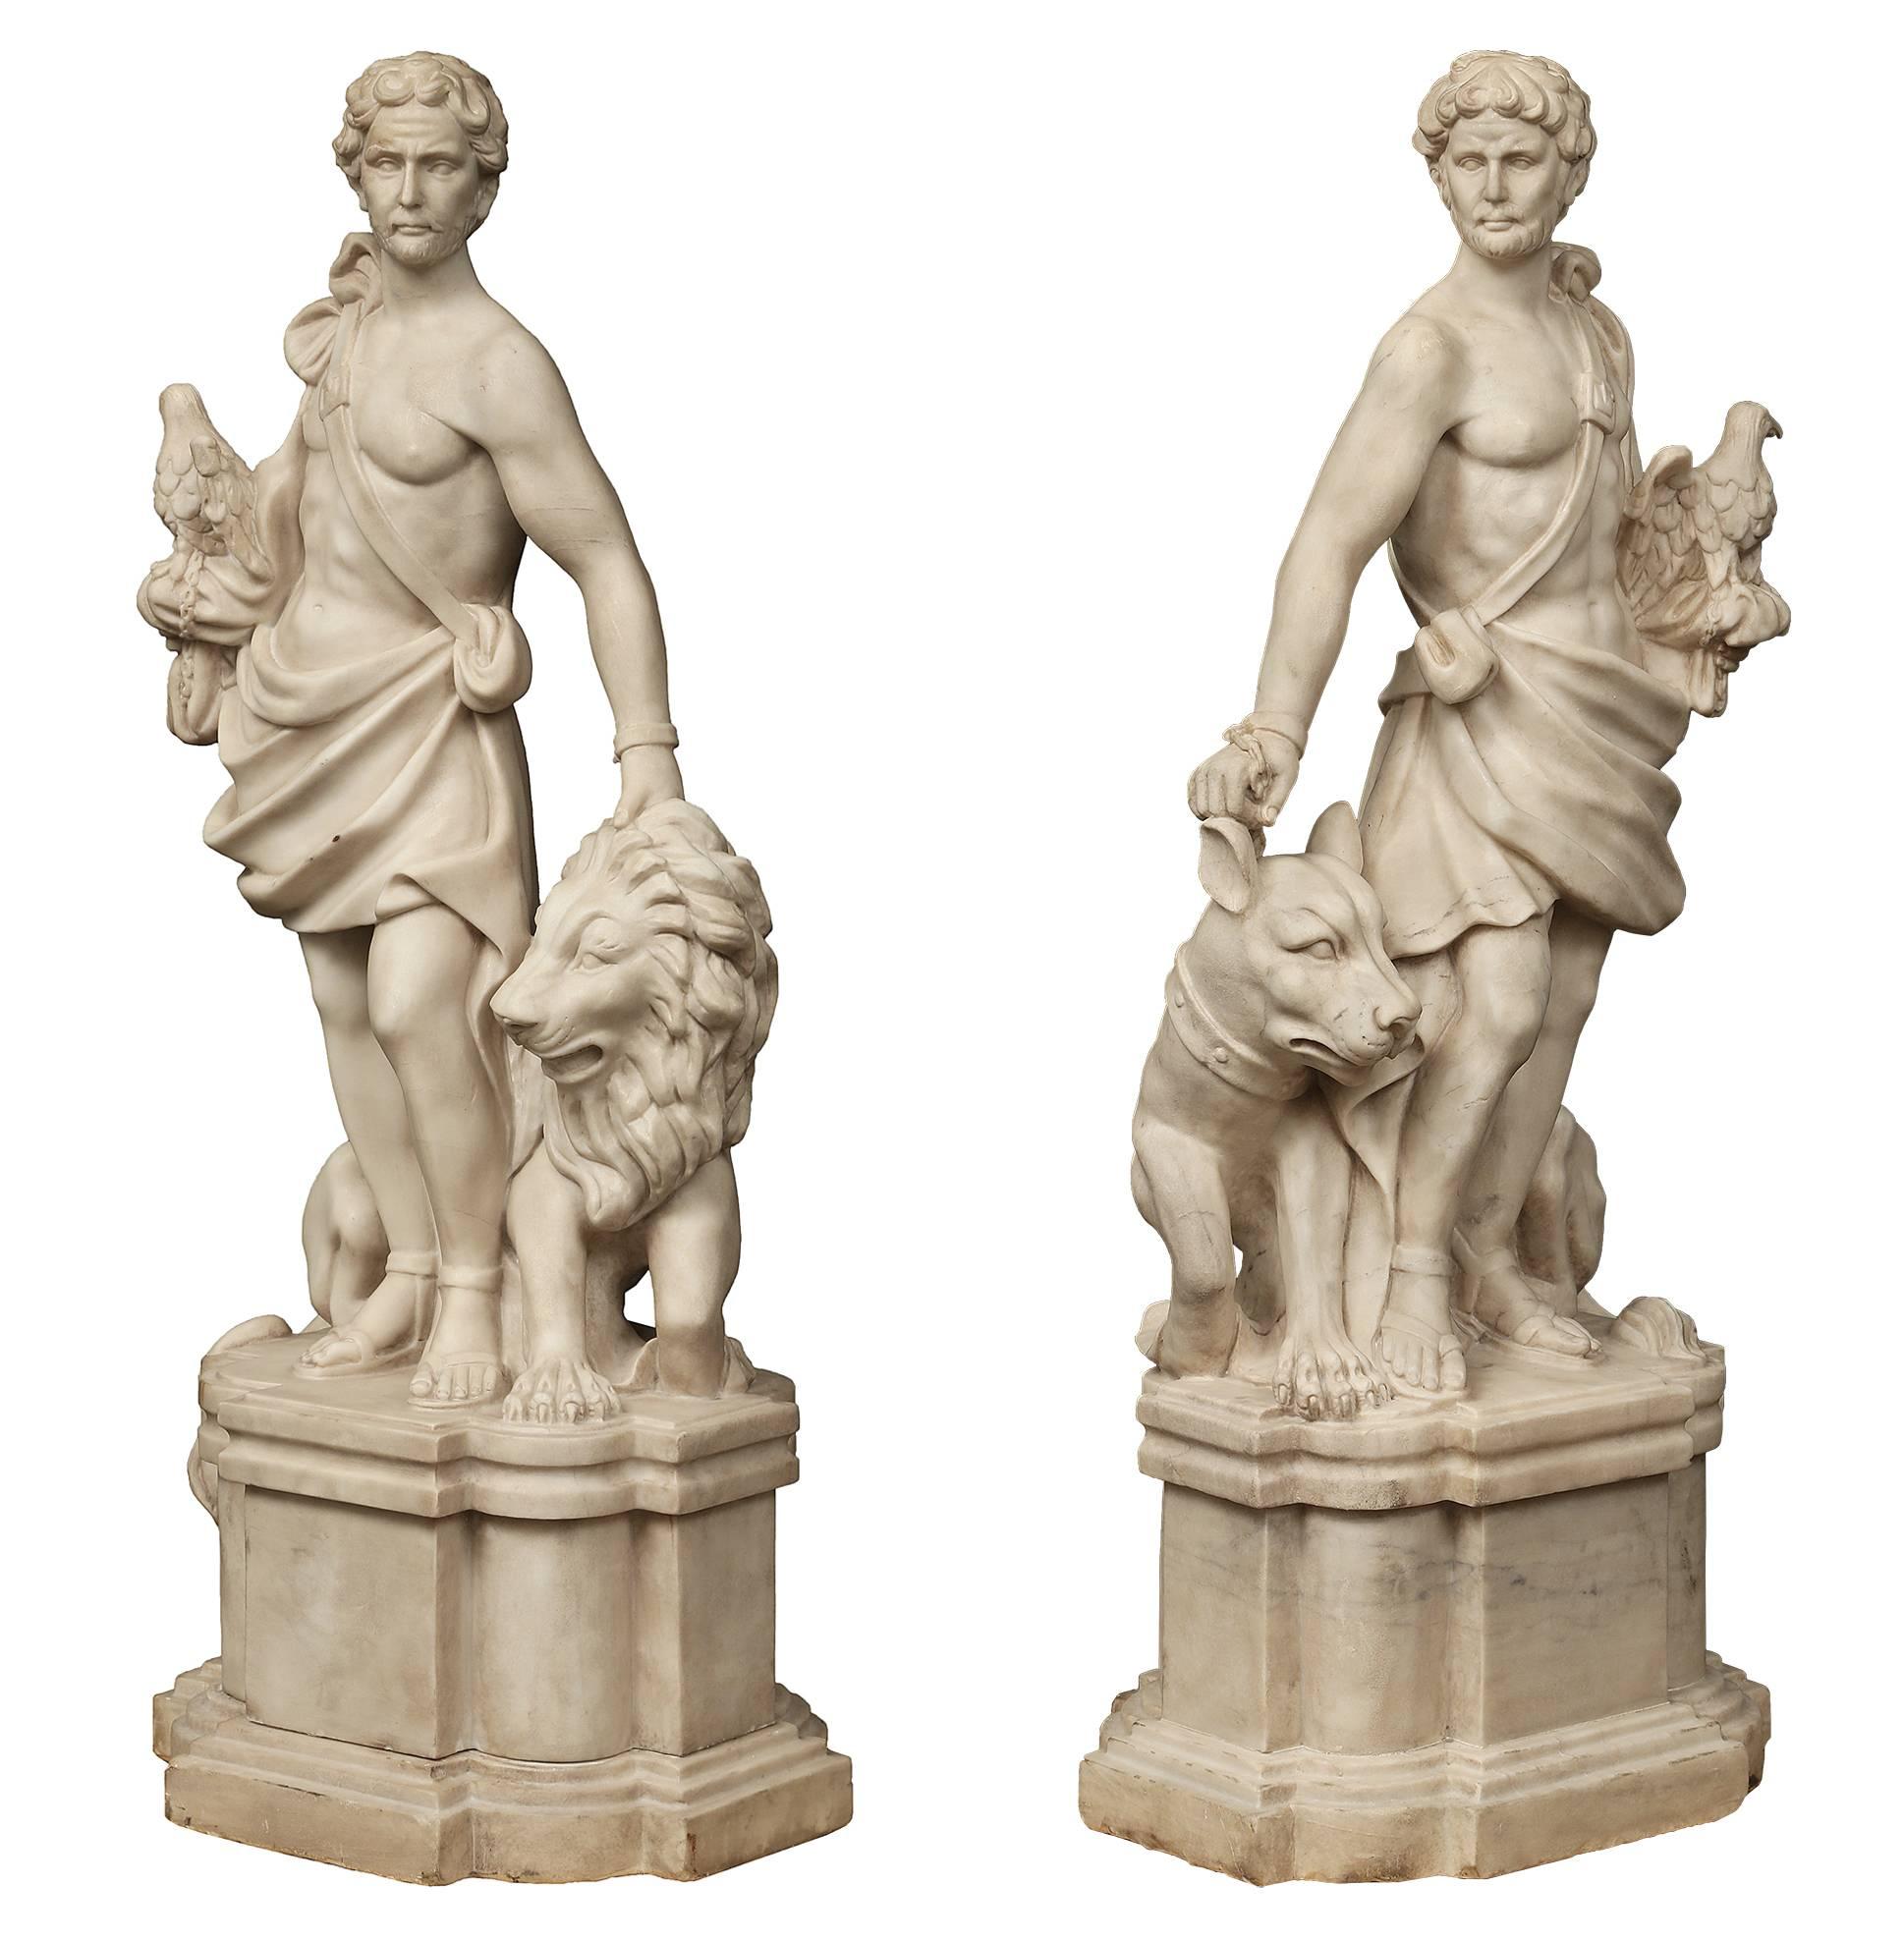 An outstanding and handsome true pair of Italian 19th century white Carrara marble statues. Each statue is raised by a rectangular pedestal base with recessed rounded corners and a stepped bottom design. Each statue is of a powerful bearded warrior